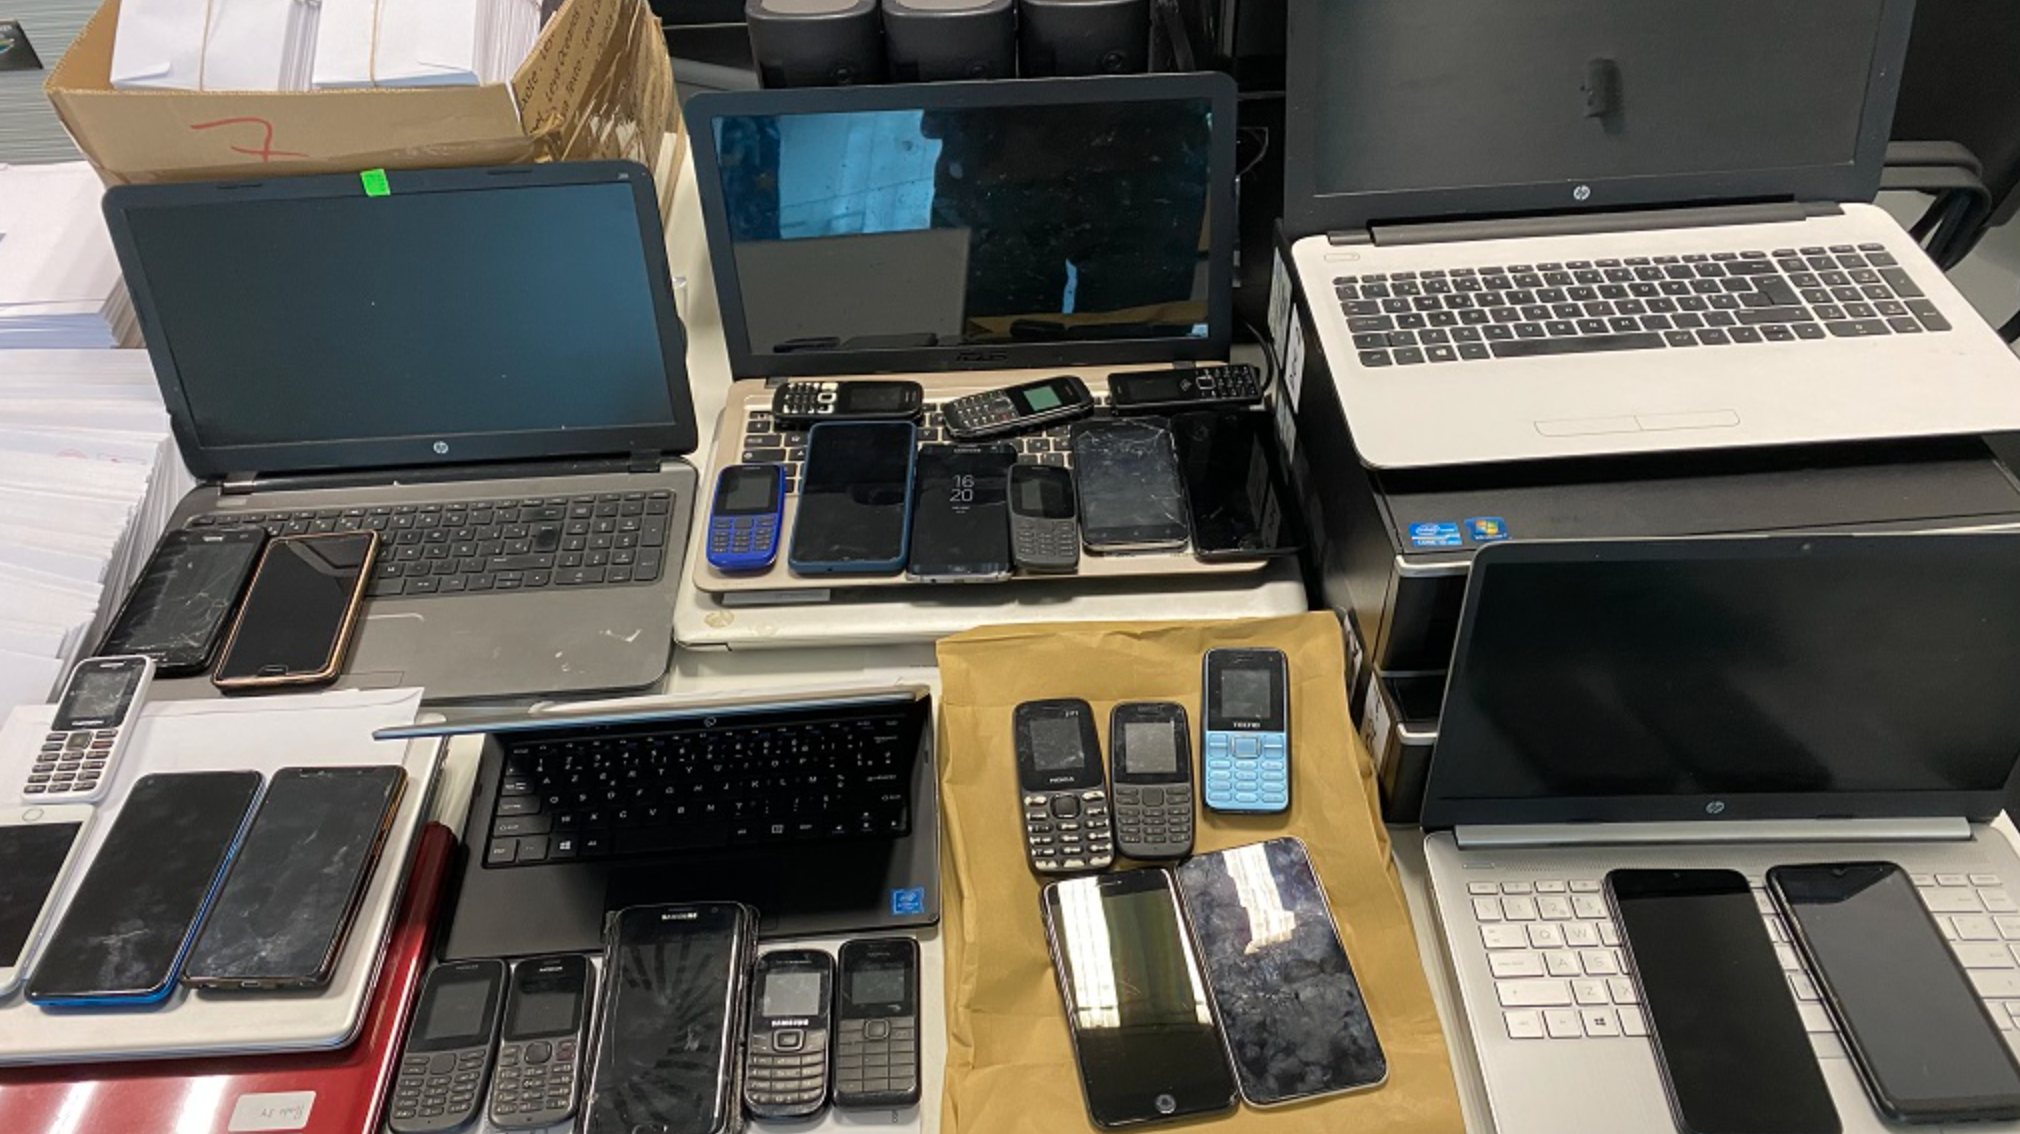 Seized devices